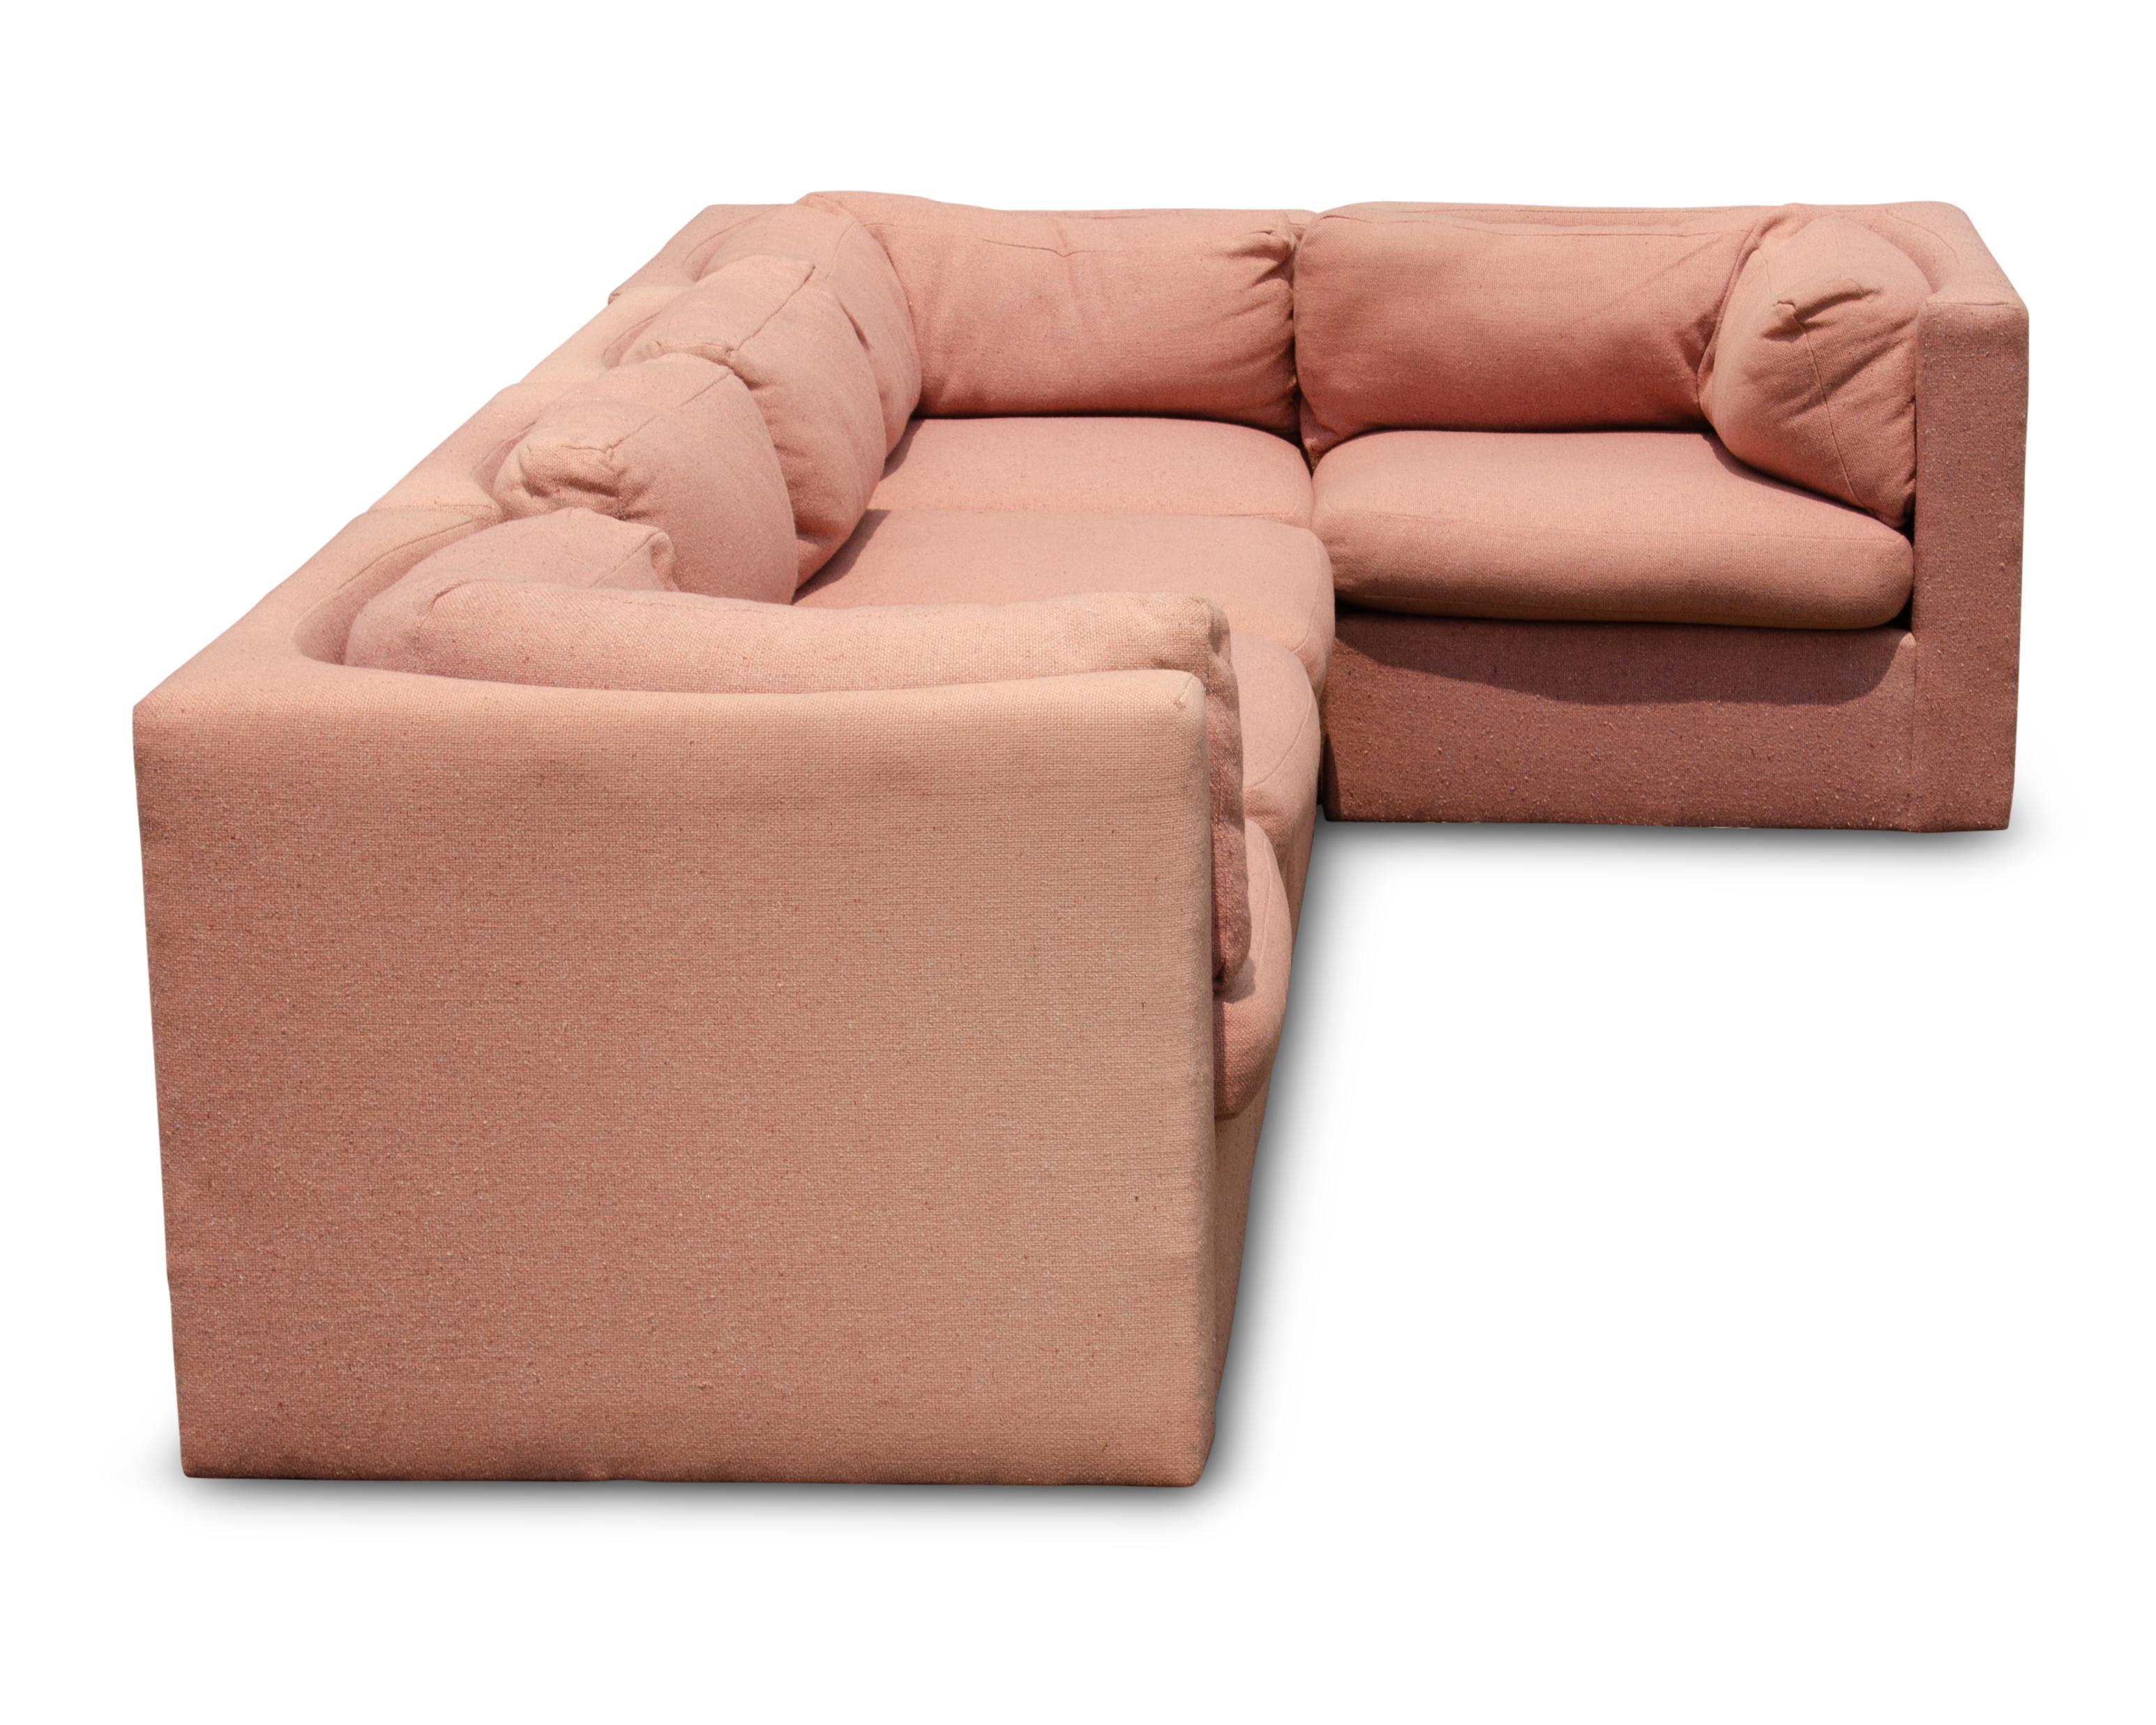 A five piece sectional or modular sofa designed by Milo Baughman for Thayer Coggin. This difficult to find version features flat outside seat backs and curved or contoured seats. 

Dimensions given are for the first image with the sectional in an